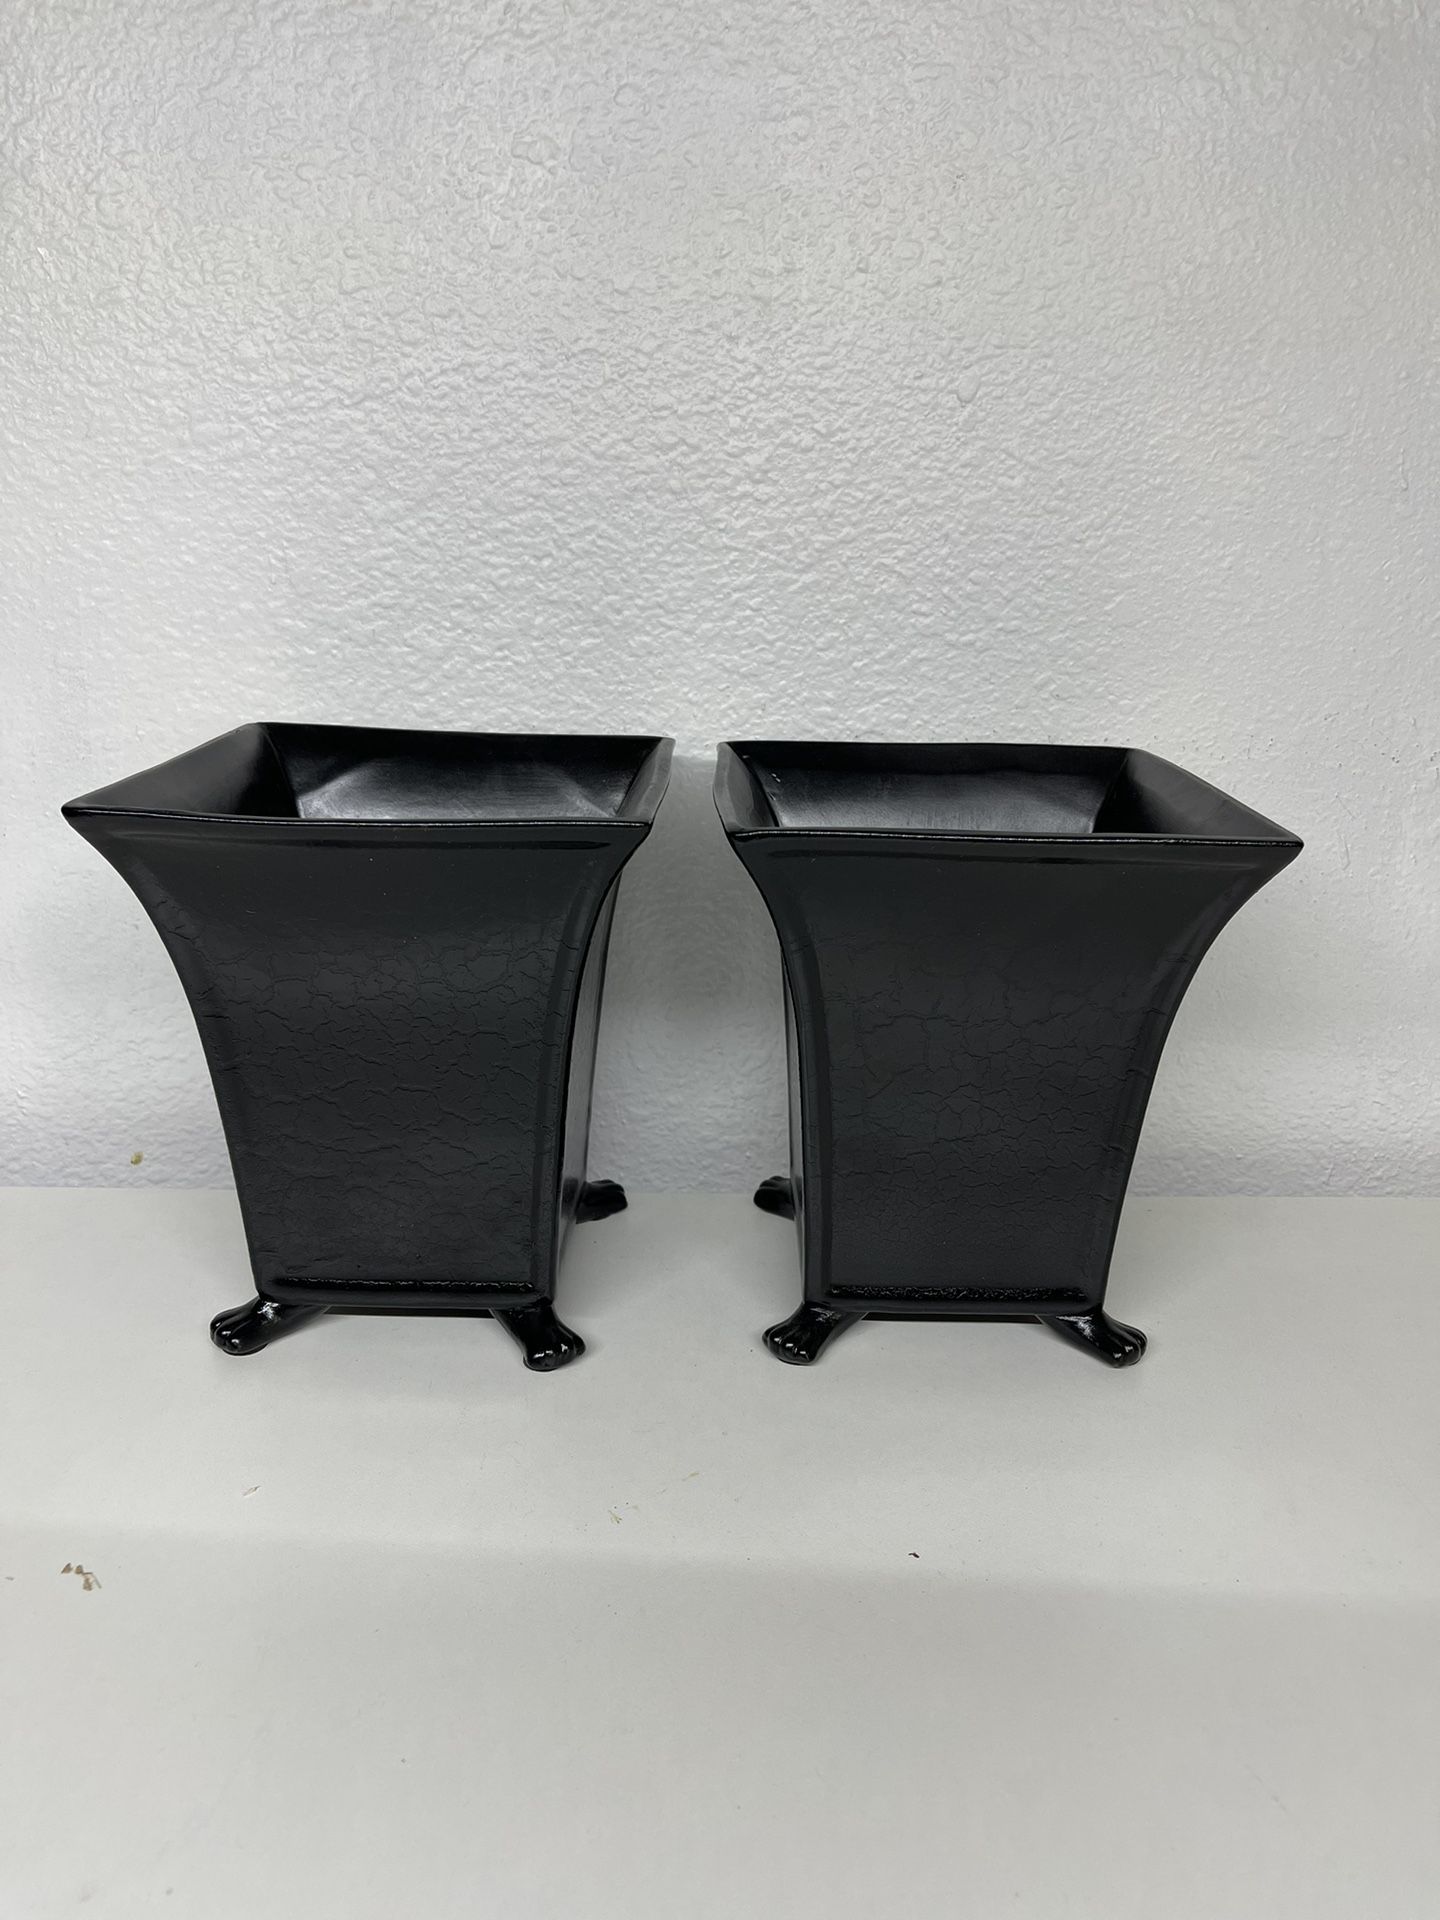 Square Ceramic Pots —Planters with feets ($10 each)